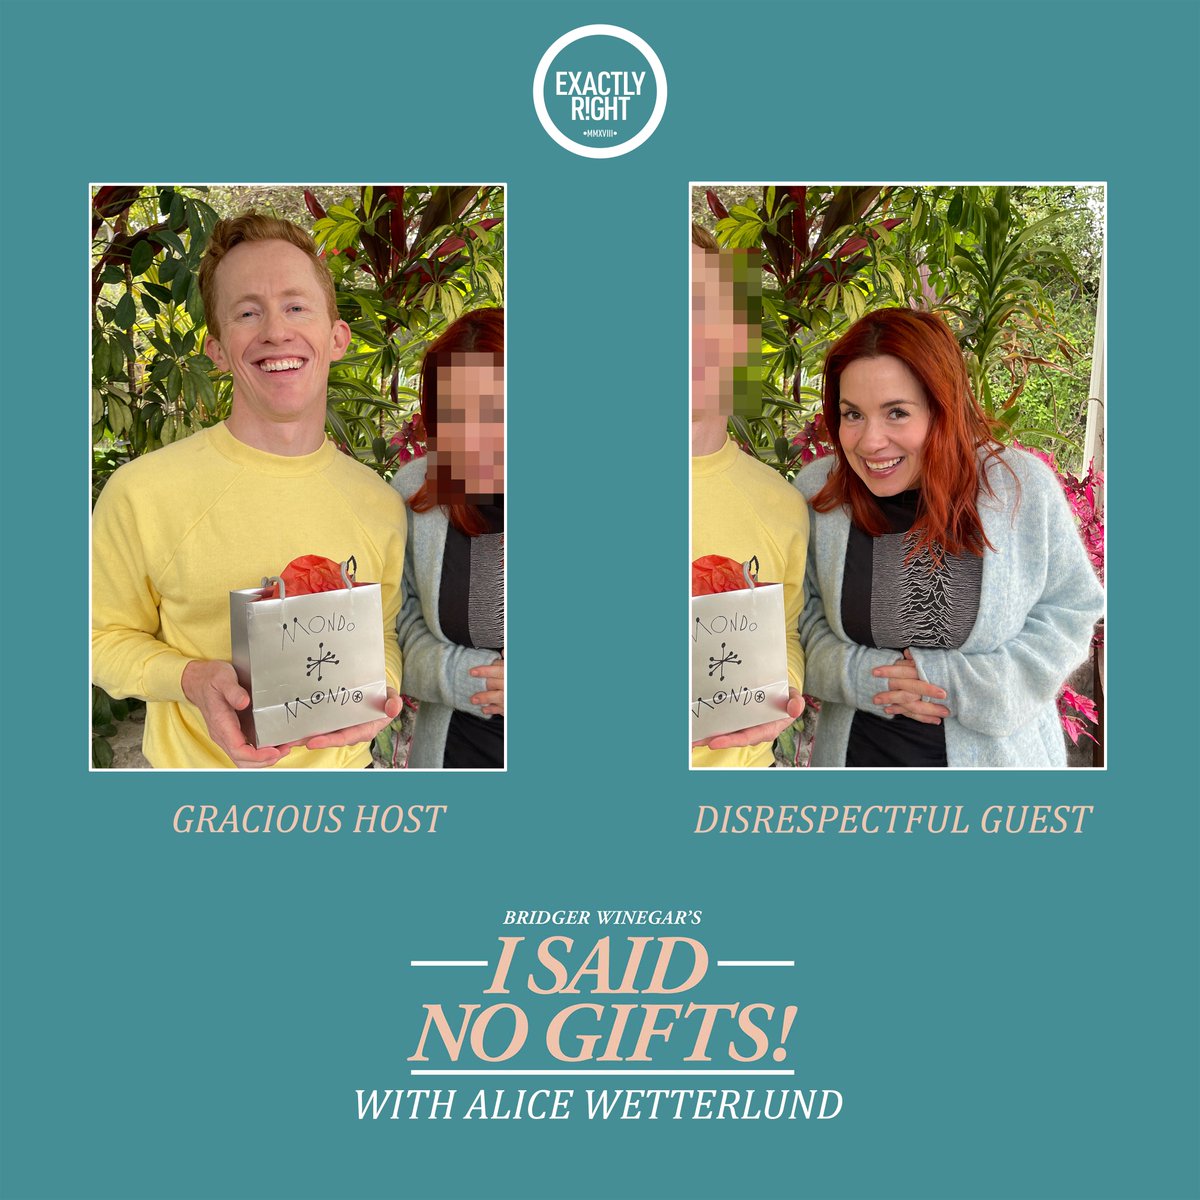 Here is what happens this week: @bridger_w's nerves remain intact despite @alicewetterlund (Resident Alien, Silicon Valley) startling him with a gift. The two discuss hustle culture, the swing revival of the 90s, and Cadbury Eggs. podcasts.apple.com/us/podcast/i-s…